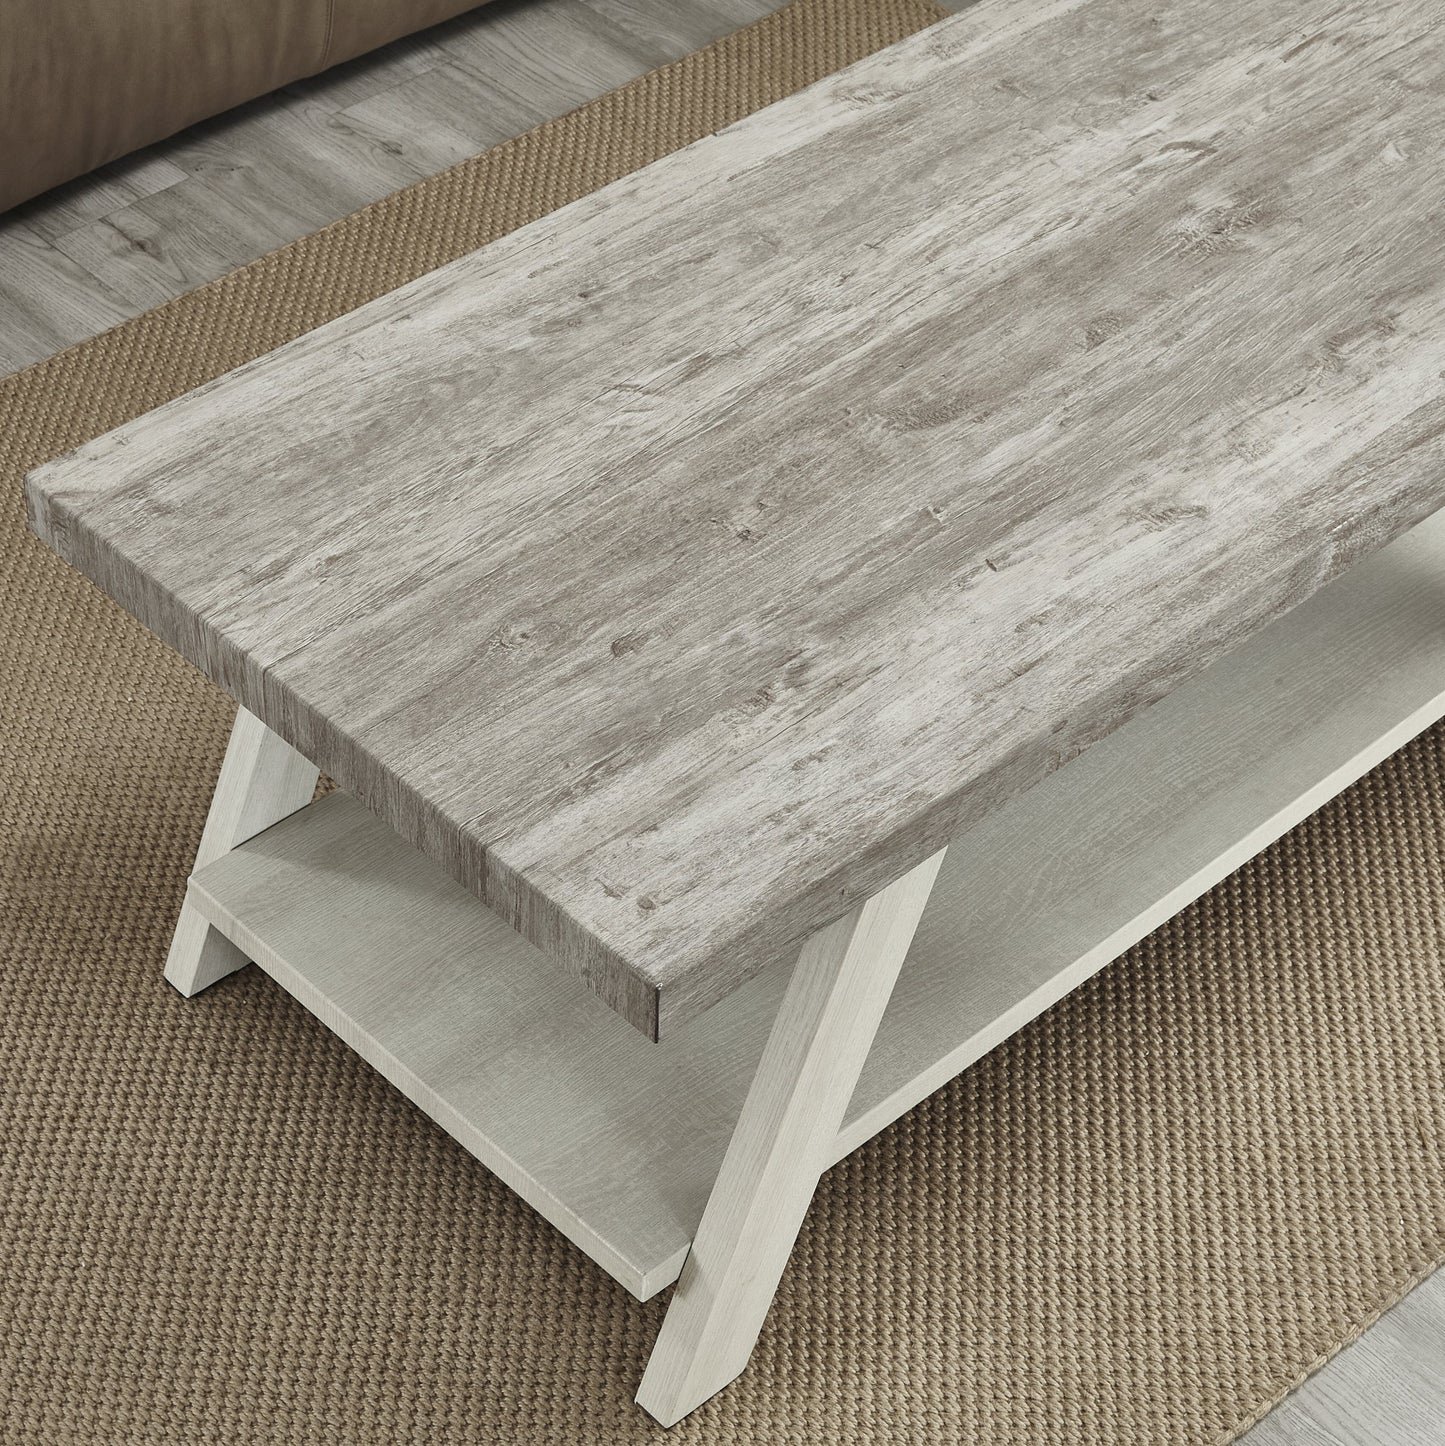 Athens Contemporary Two-Tone Wood Shelf Coffee Table in Weathered Gray and Beige